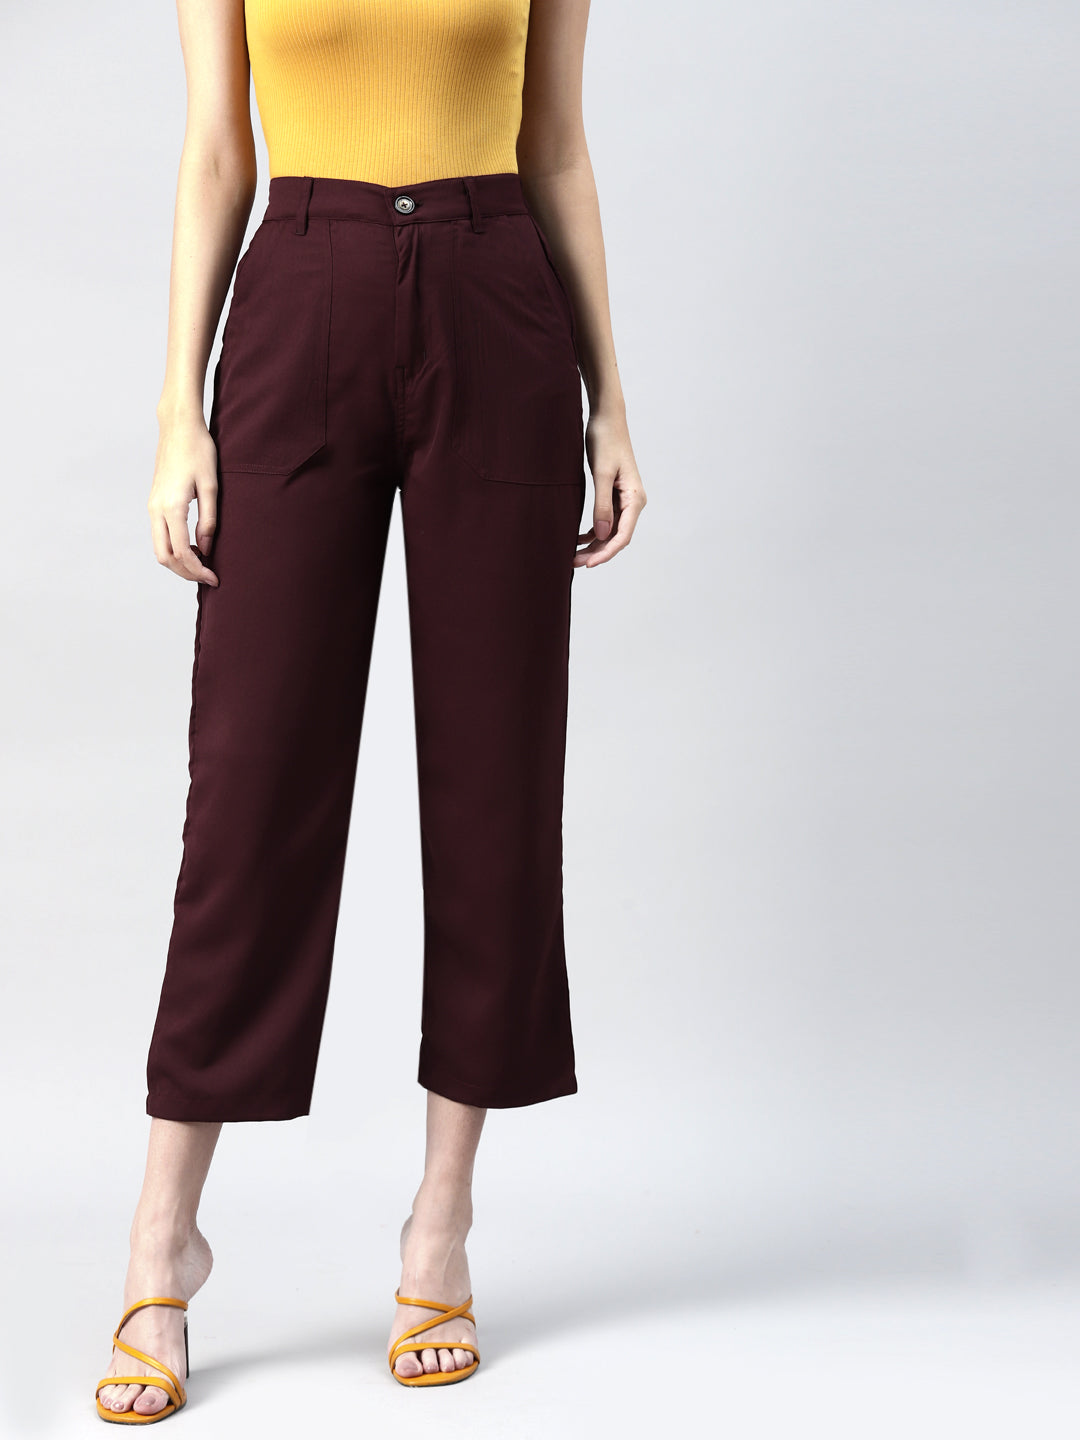 D.E.C.K By Decollage 2114 Cropped Trousers (7 Colours) – Missy Online:  Shoes, Fashion & Accessories Based in Leeds